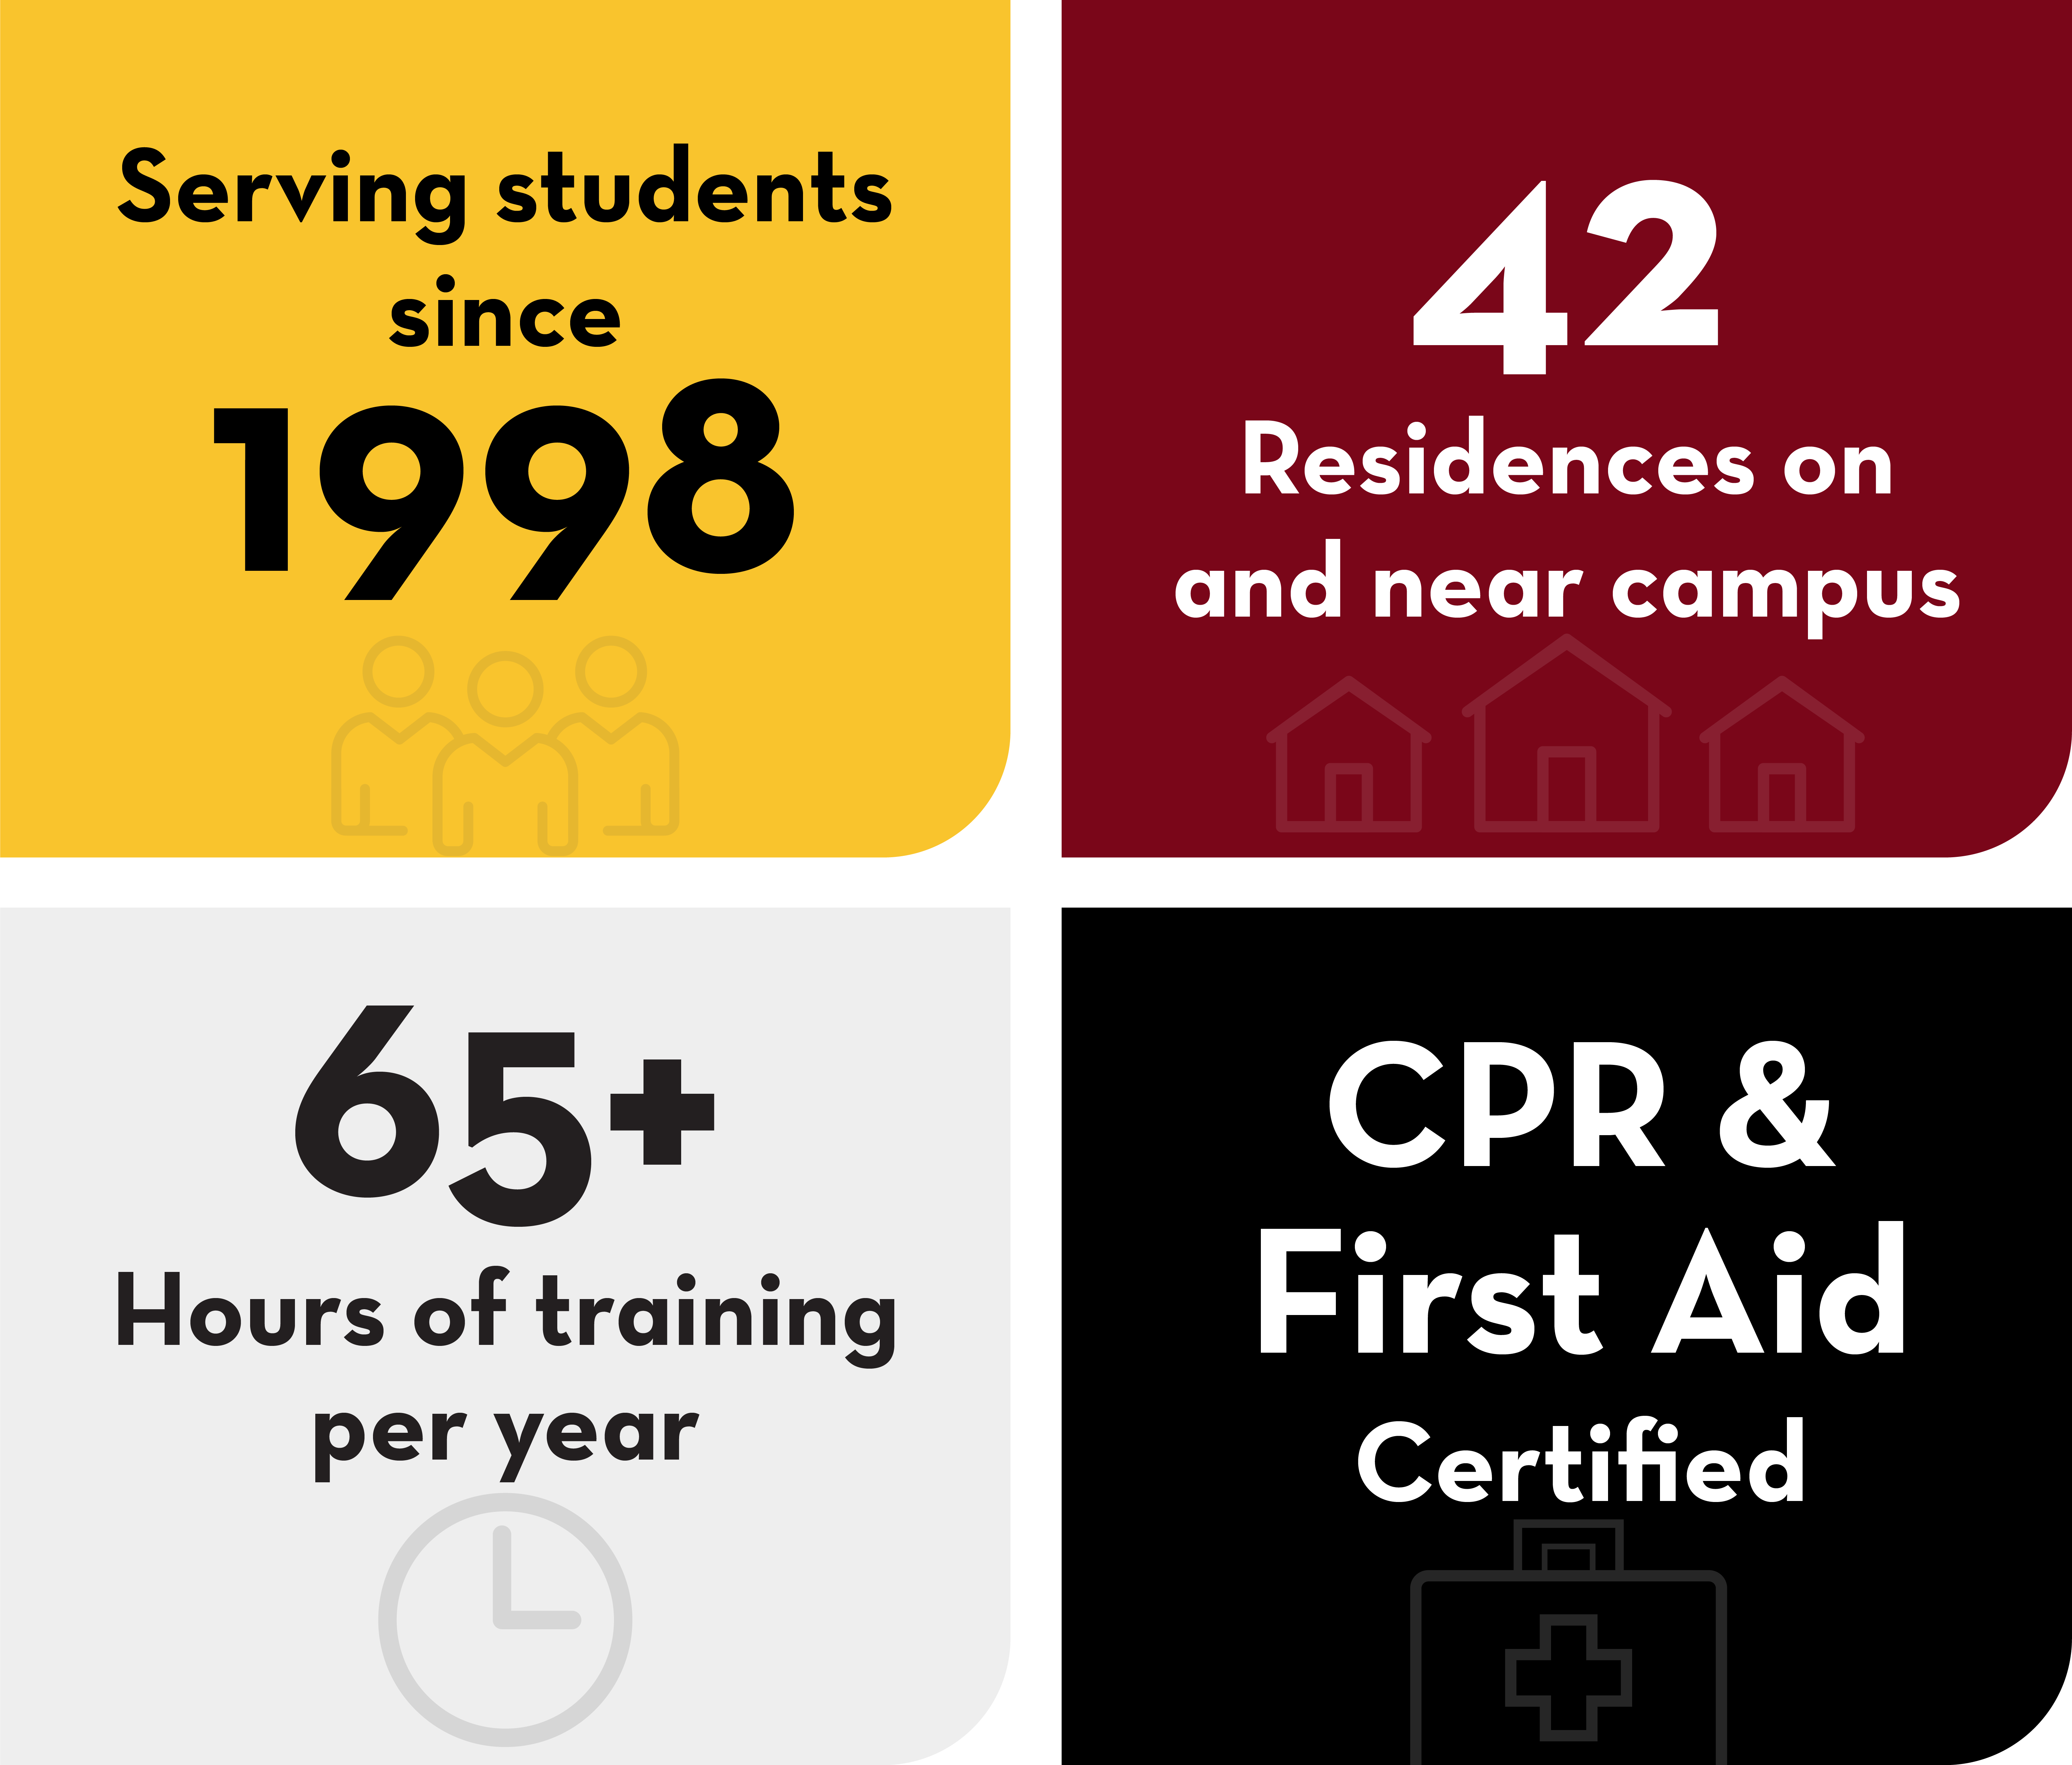 Health Advocates by the numbers: Serving students since 1998; 42 Residences on and near campus; 65+ Hours of training per year; CPR & First Aid Certified